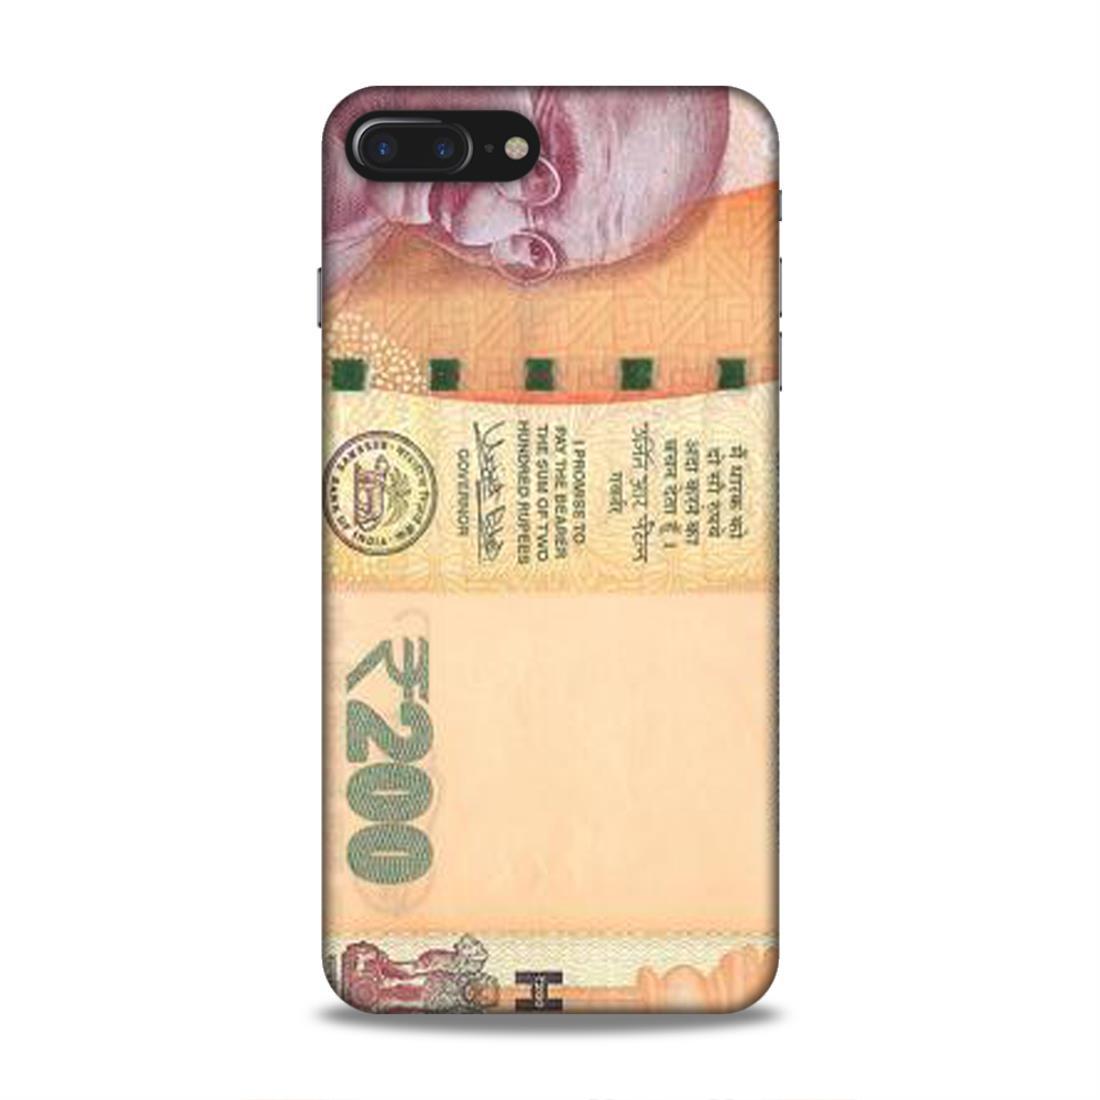 Rs 200 Currency Note iPhone 7 Plus Phone Case Cover